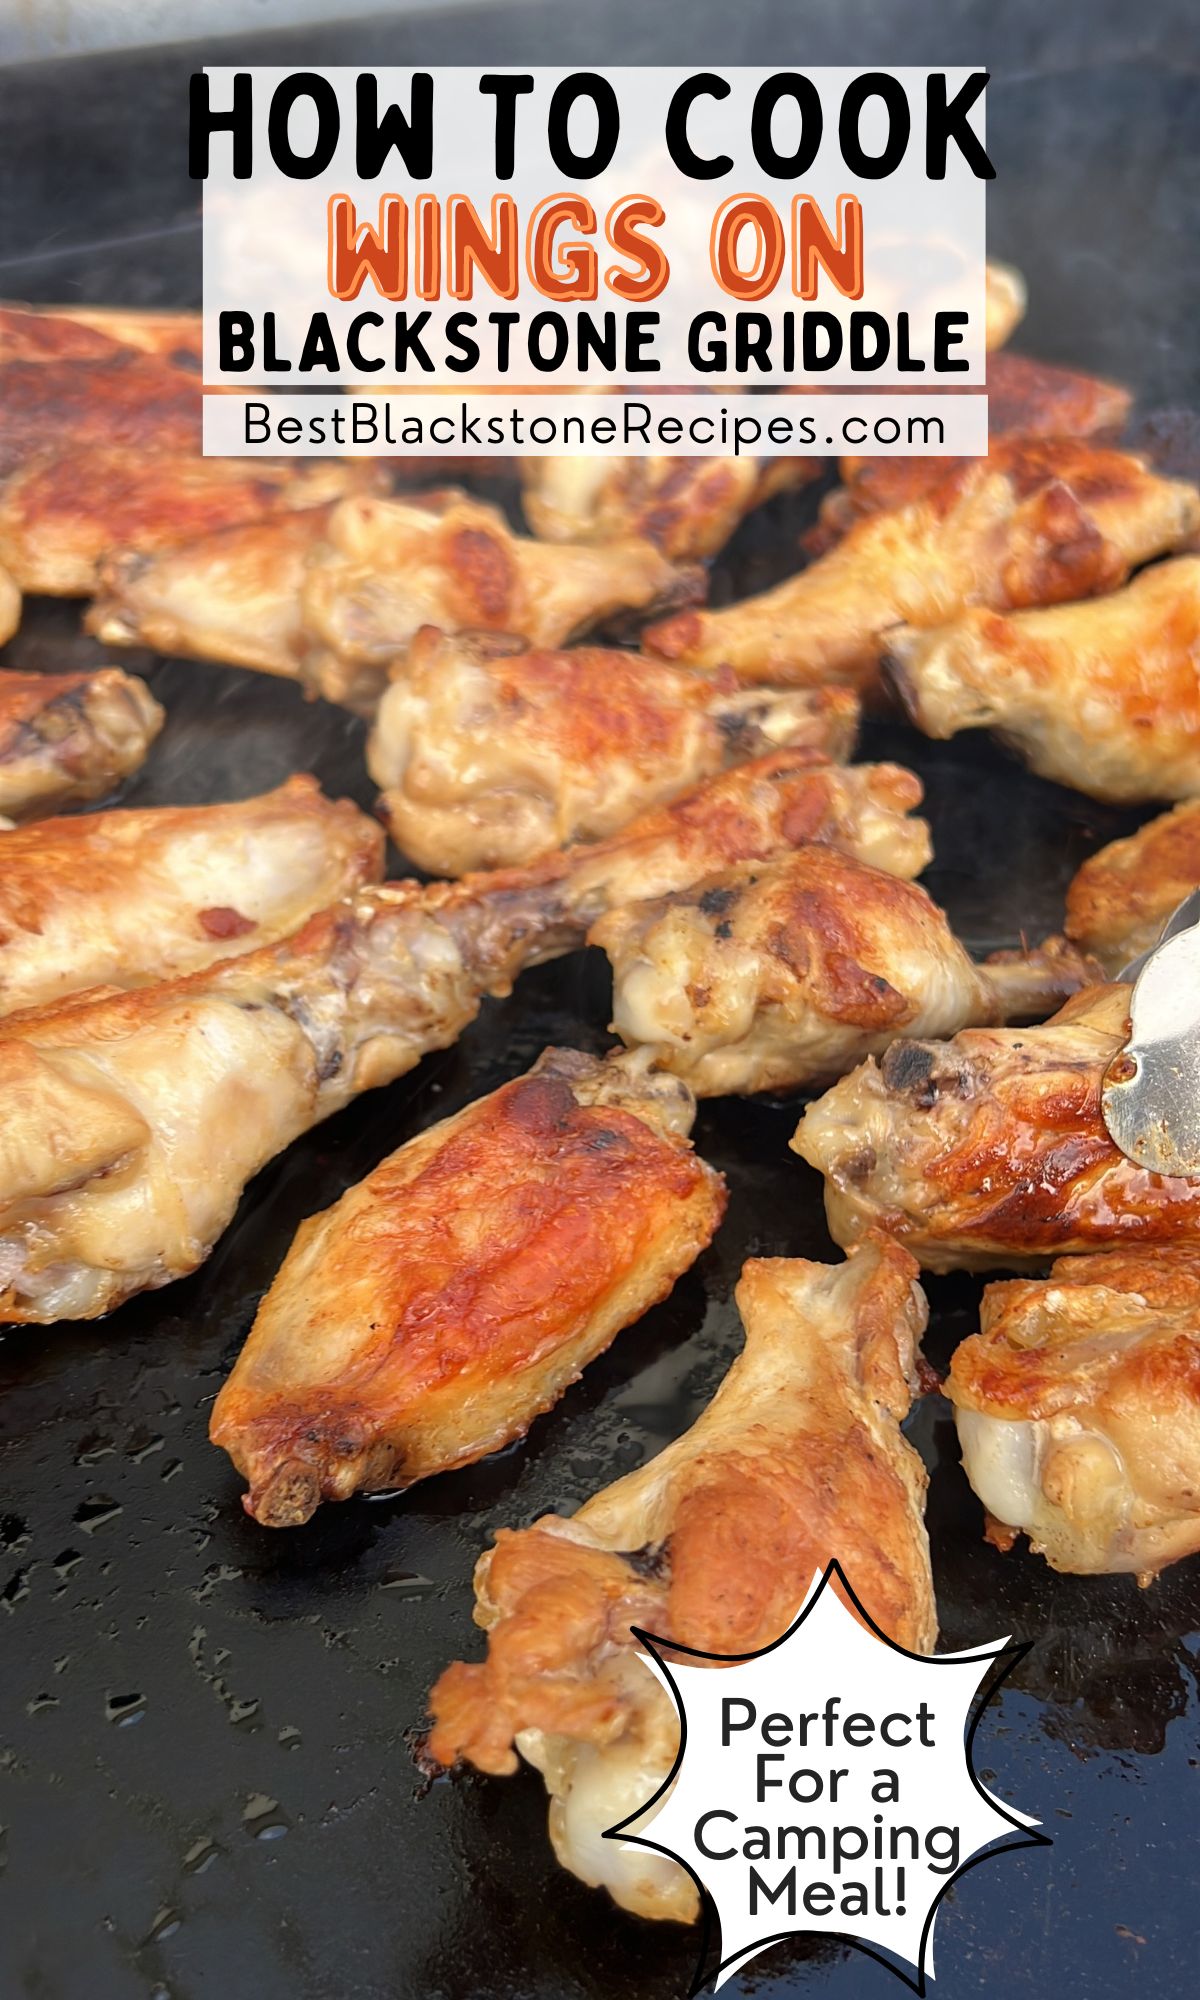 https://bestblackstonerecipes.com/wp-content/uploads/2022/12/Mastering-How-to-Cook-Wings-on-Blackstone-Griddle-8.jpg